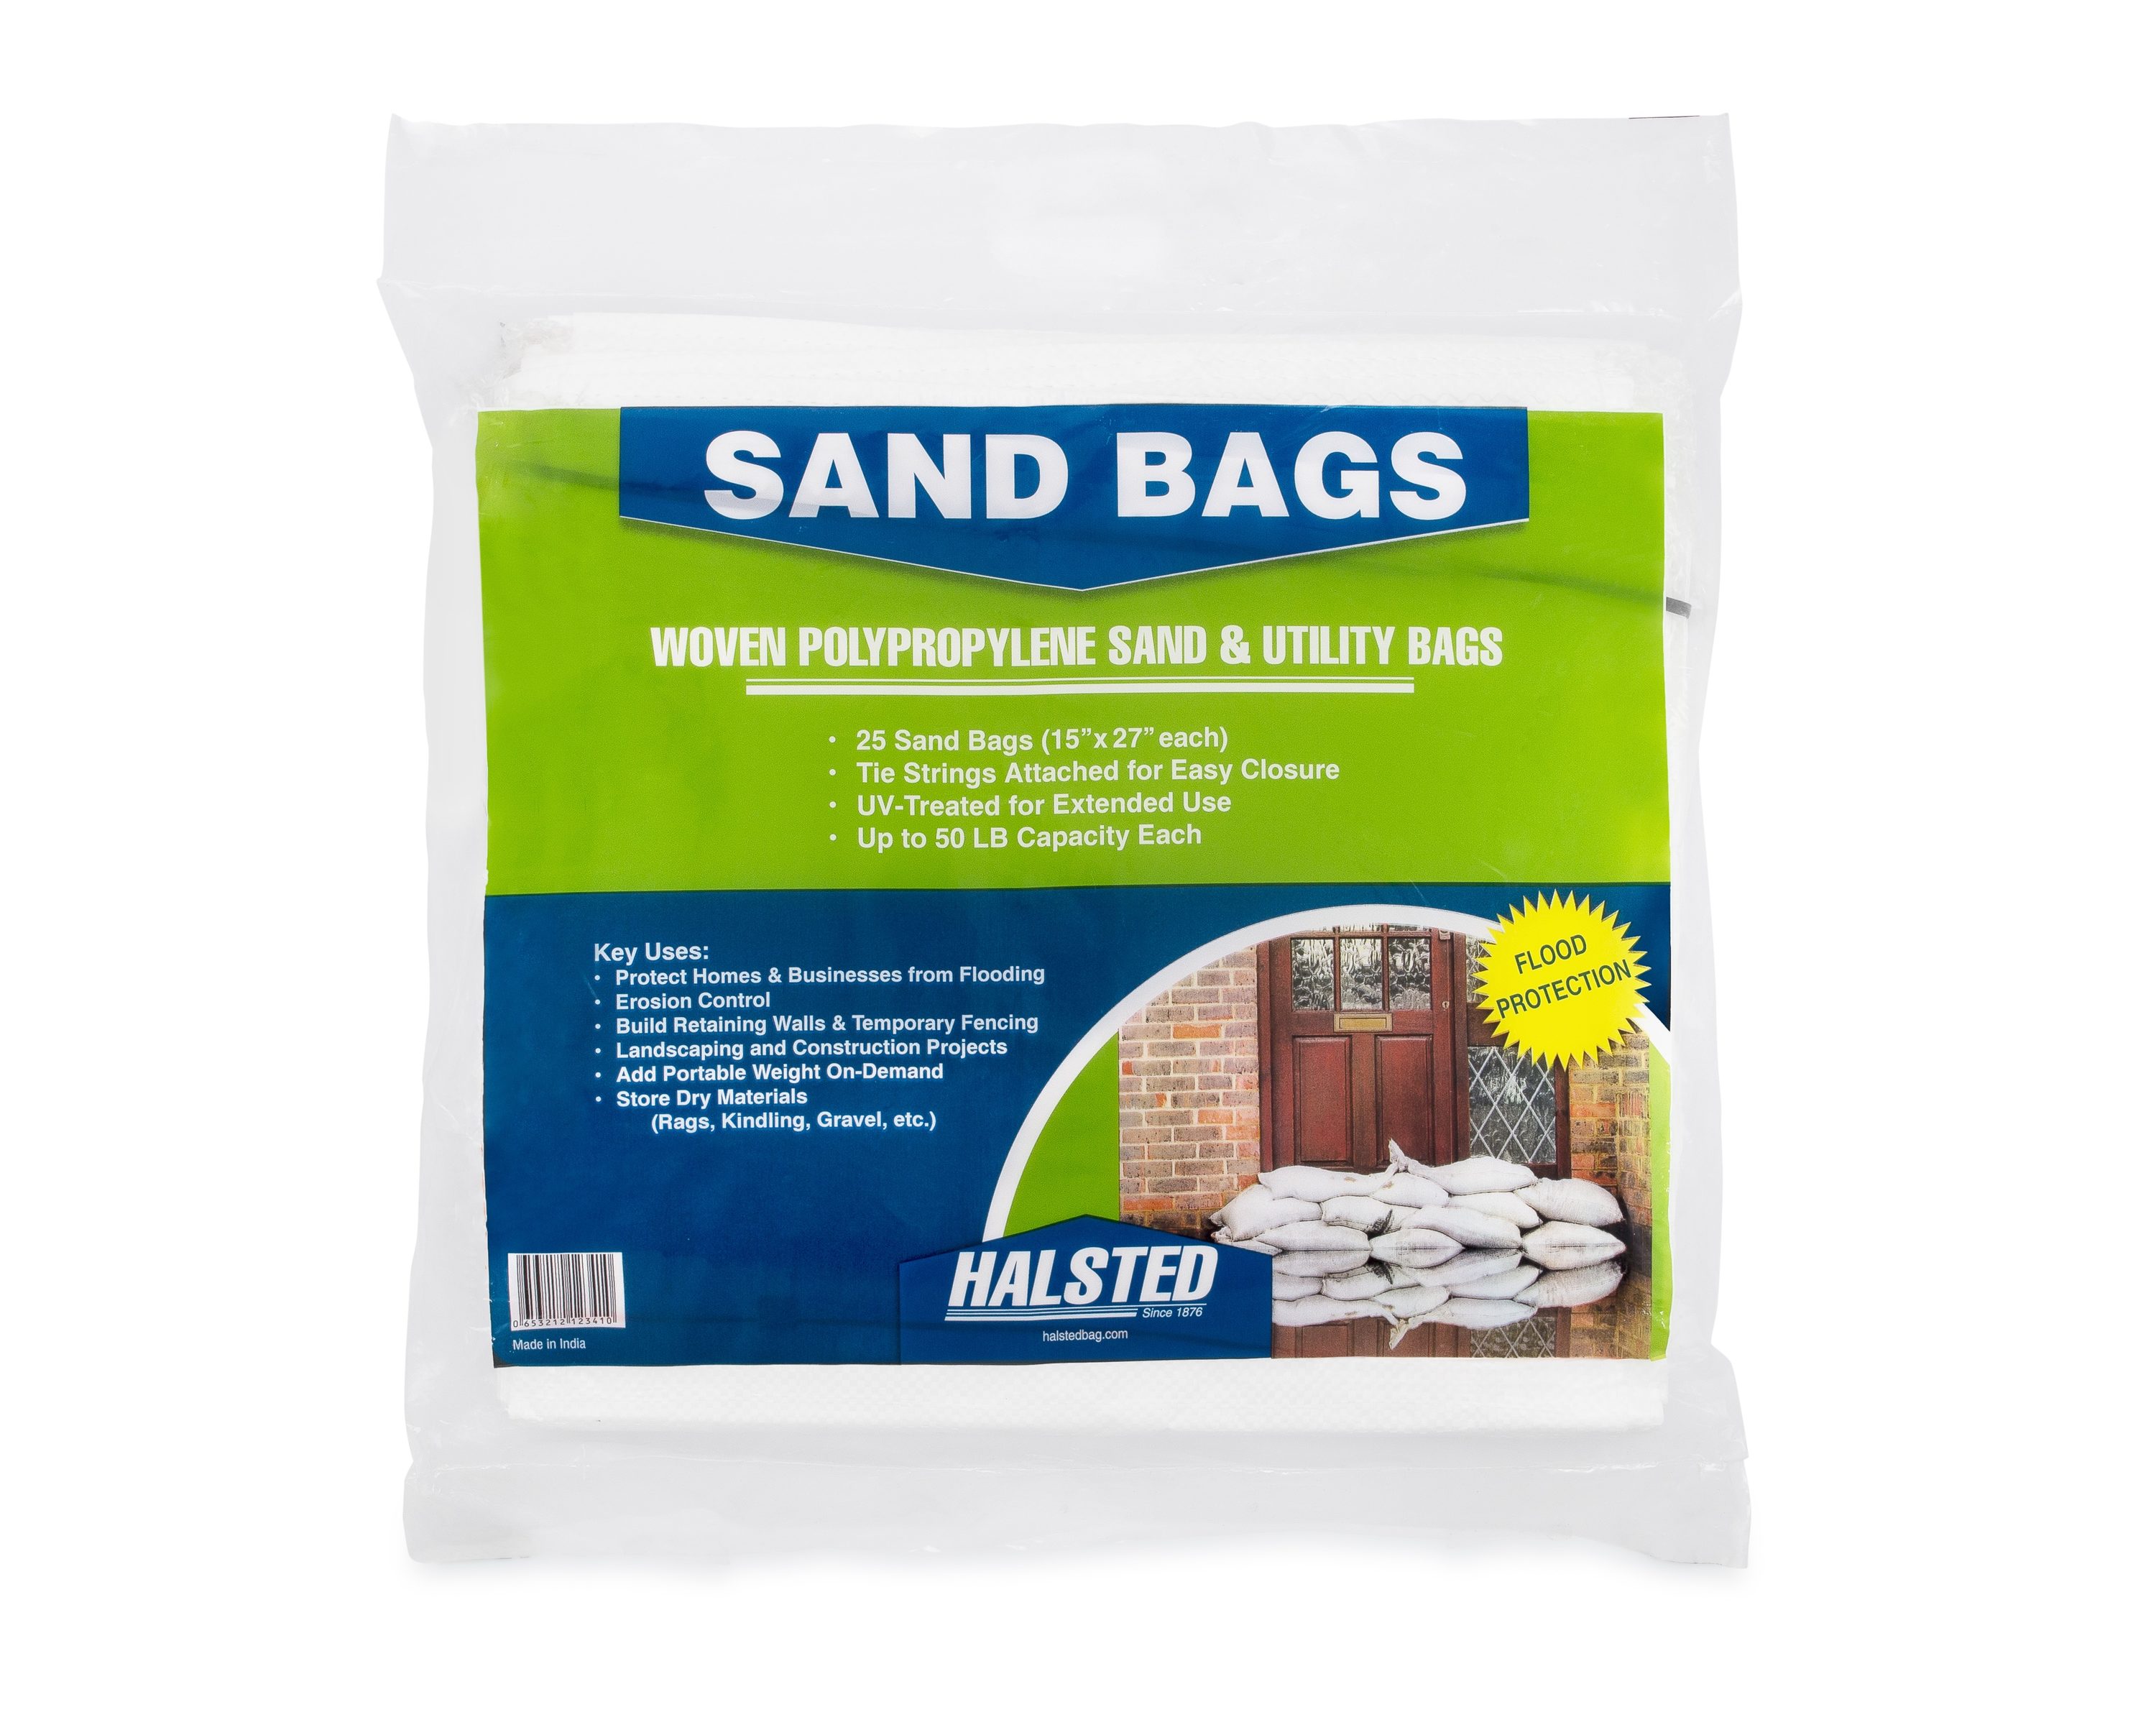 Details more than 77 bag of sand weight best - in.cdgdbentre